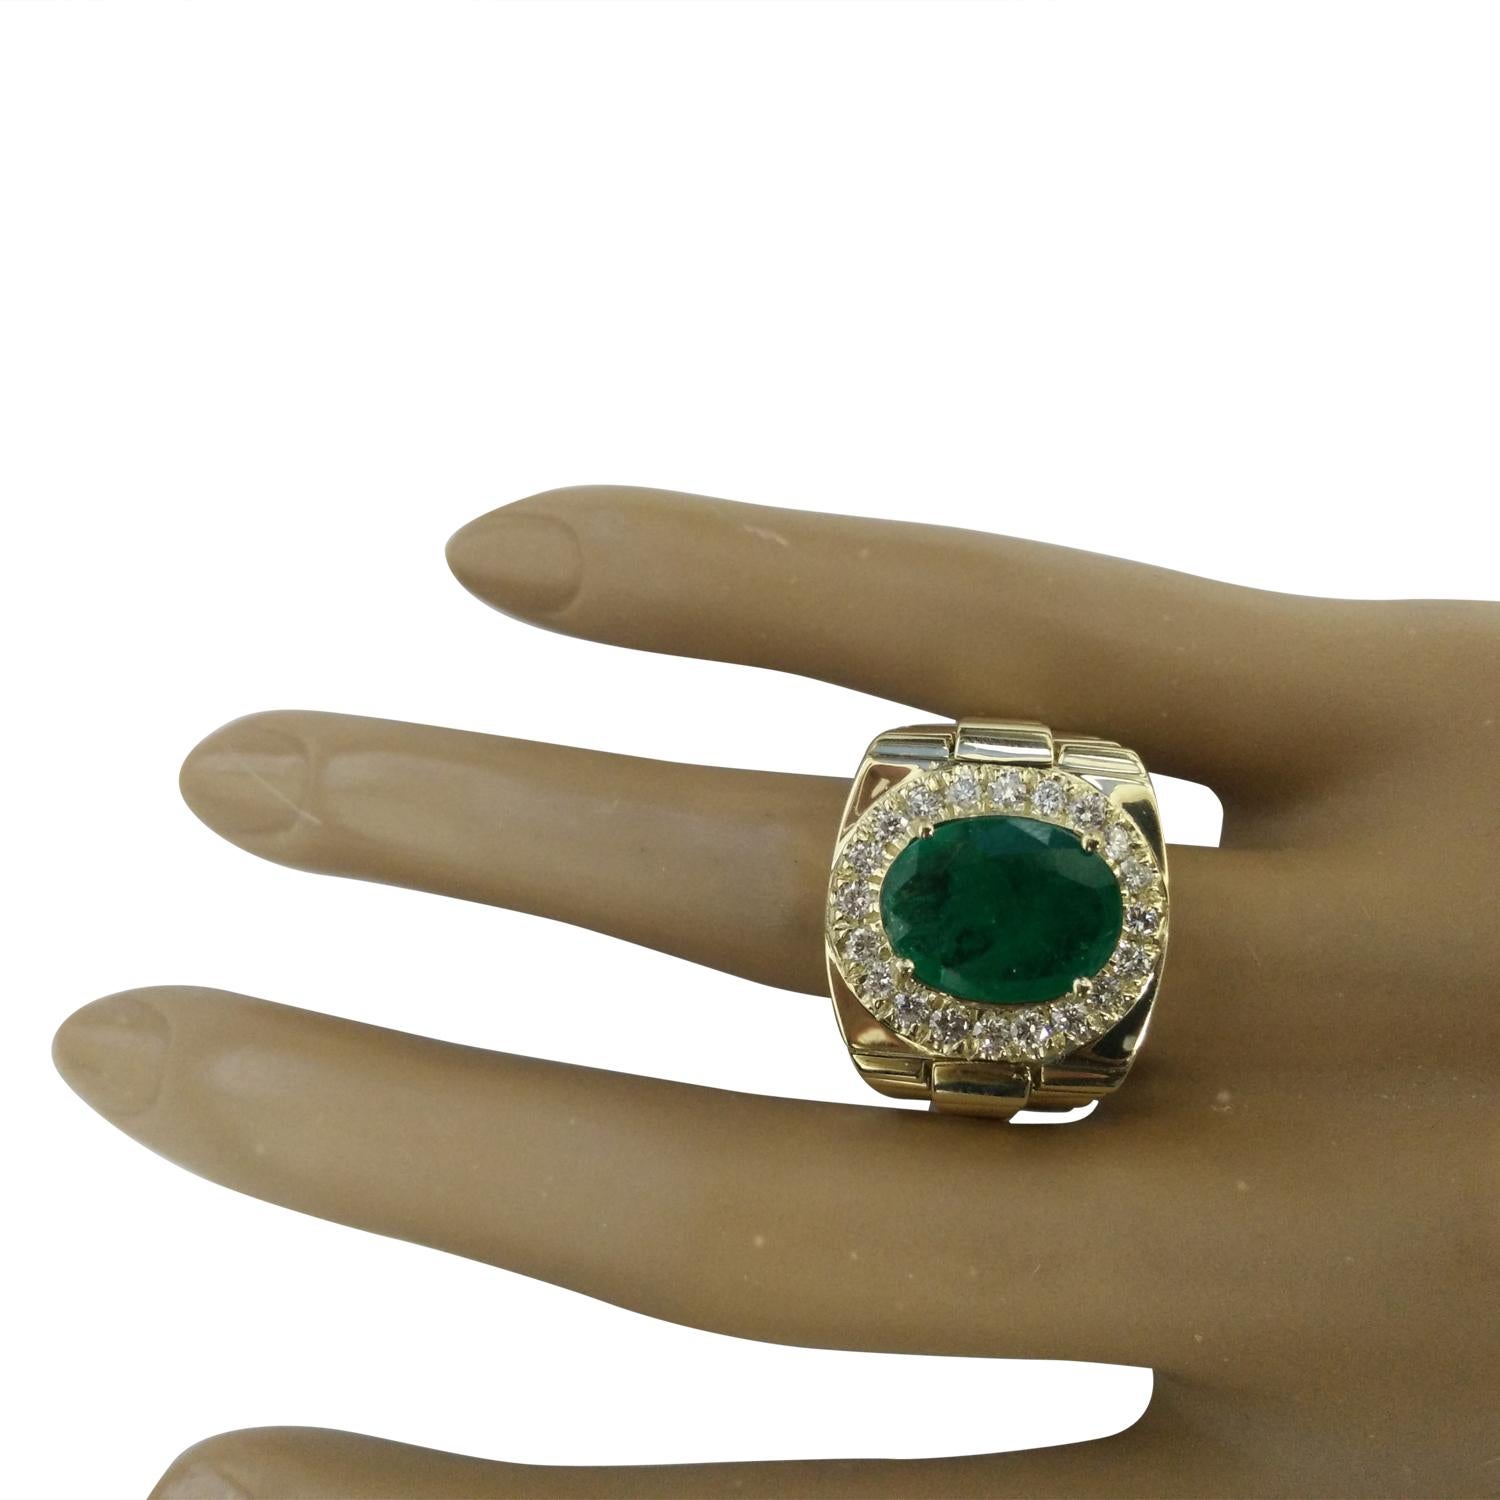 4.59 Carat Natural Emerald 14 Karat Solid Yellow Gold Diamond Ring
Stamped: 14K 
Total Ring Weight: 14 Grams 
Emerald Weight: 3.74 Carat (12.00x10.00 Millimeters)
Diamond Weight: 0.85 Carat (F-G Color, VS2-SI1 Clarity)
Quantity: 20 
Face Measures: